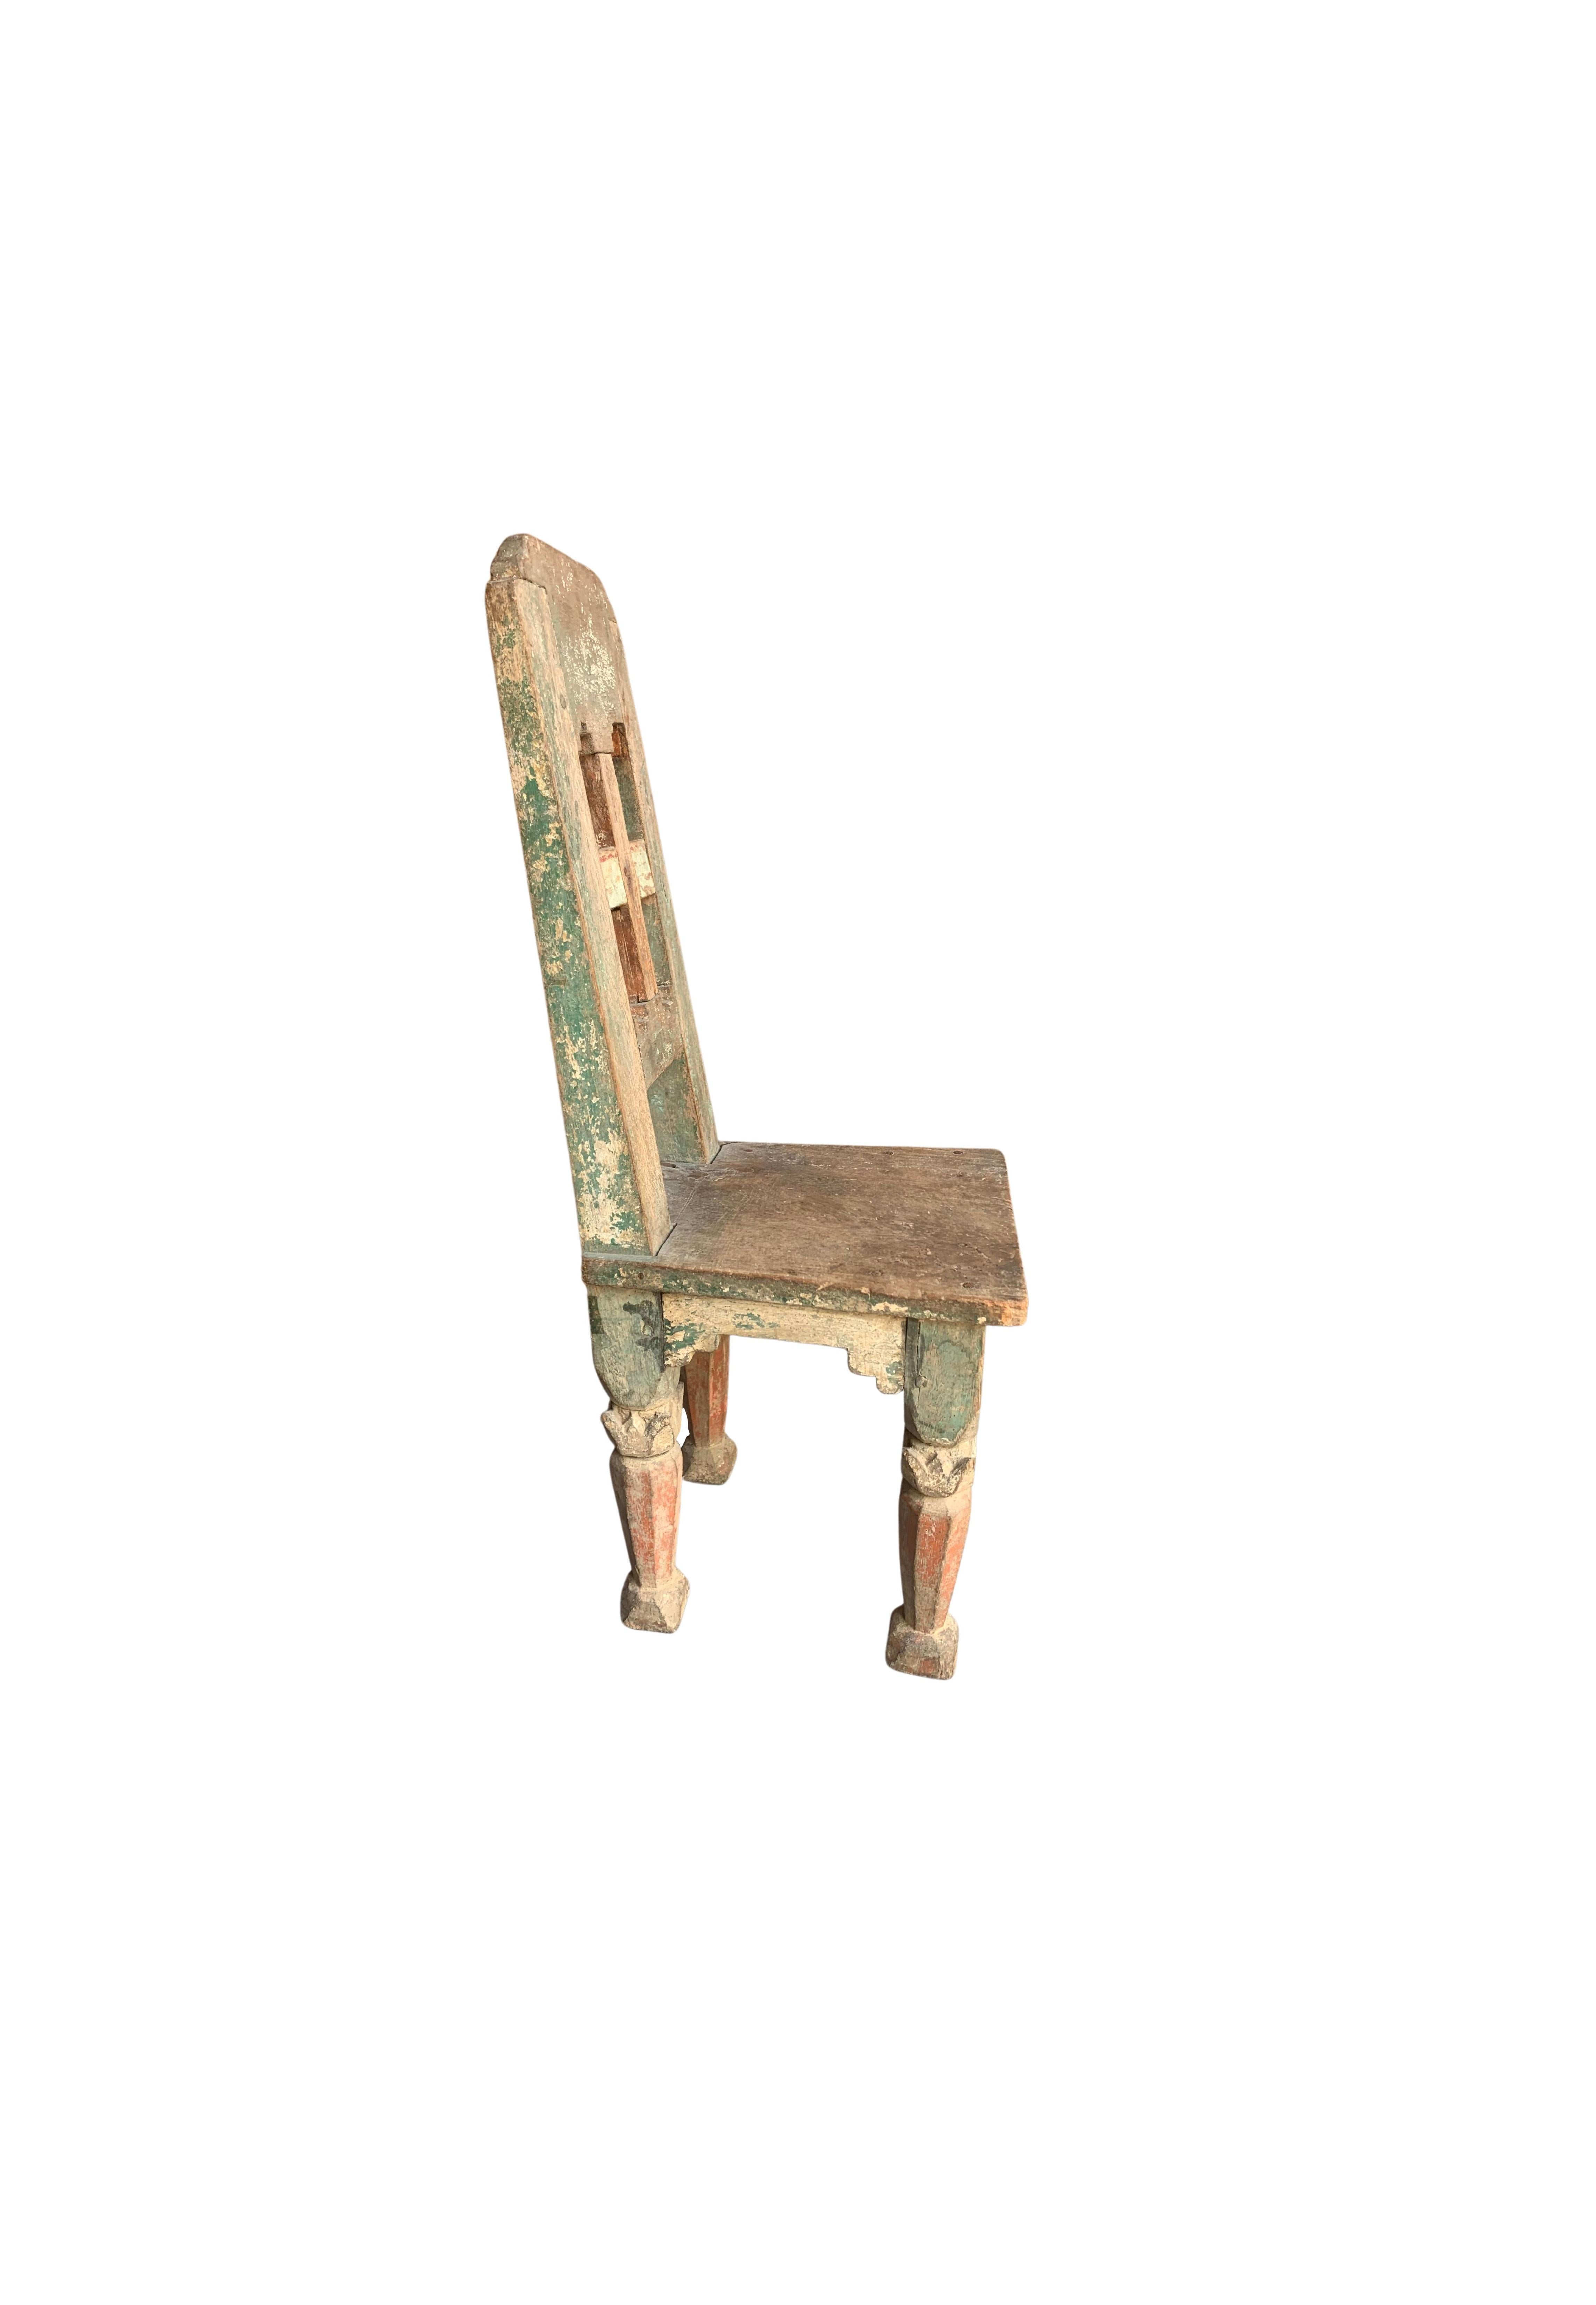 Indonesian Wooden Tobacco Plantation Mini Chair, Java, Indonesia, c. 1900 For Sale